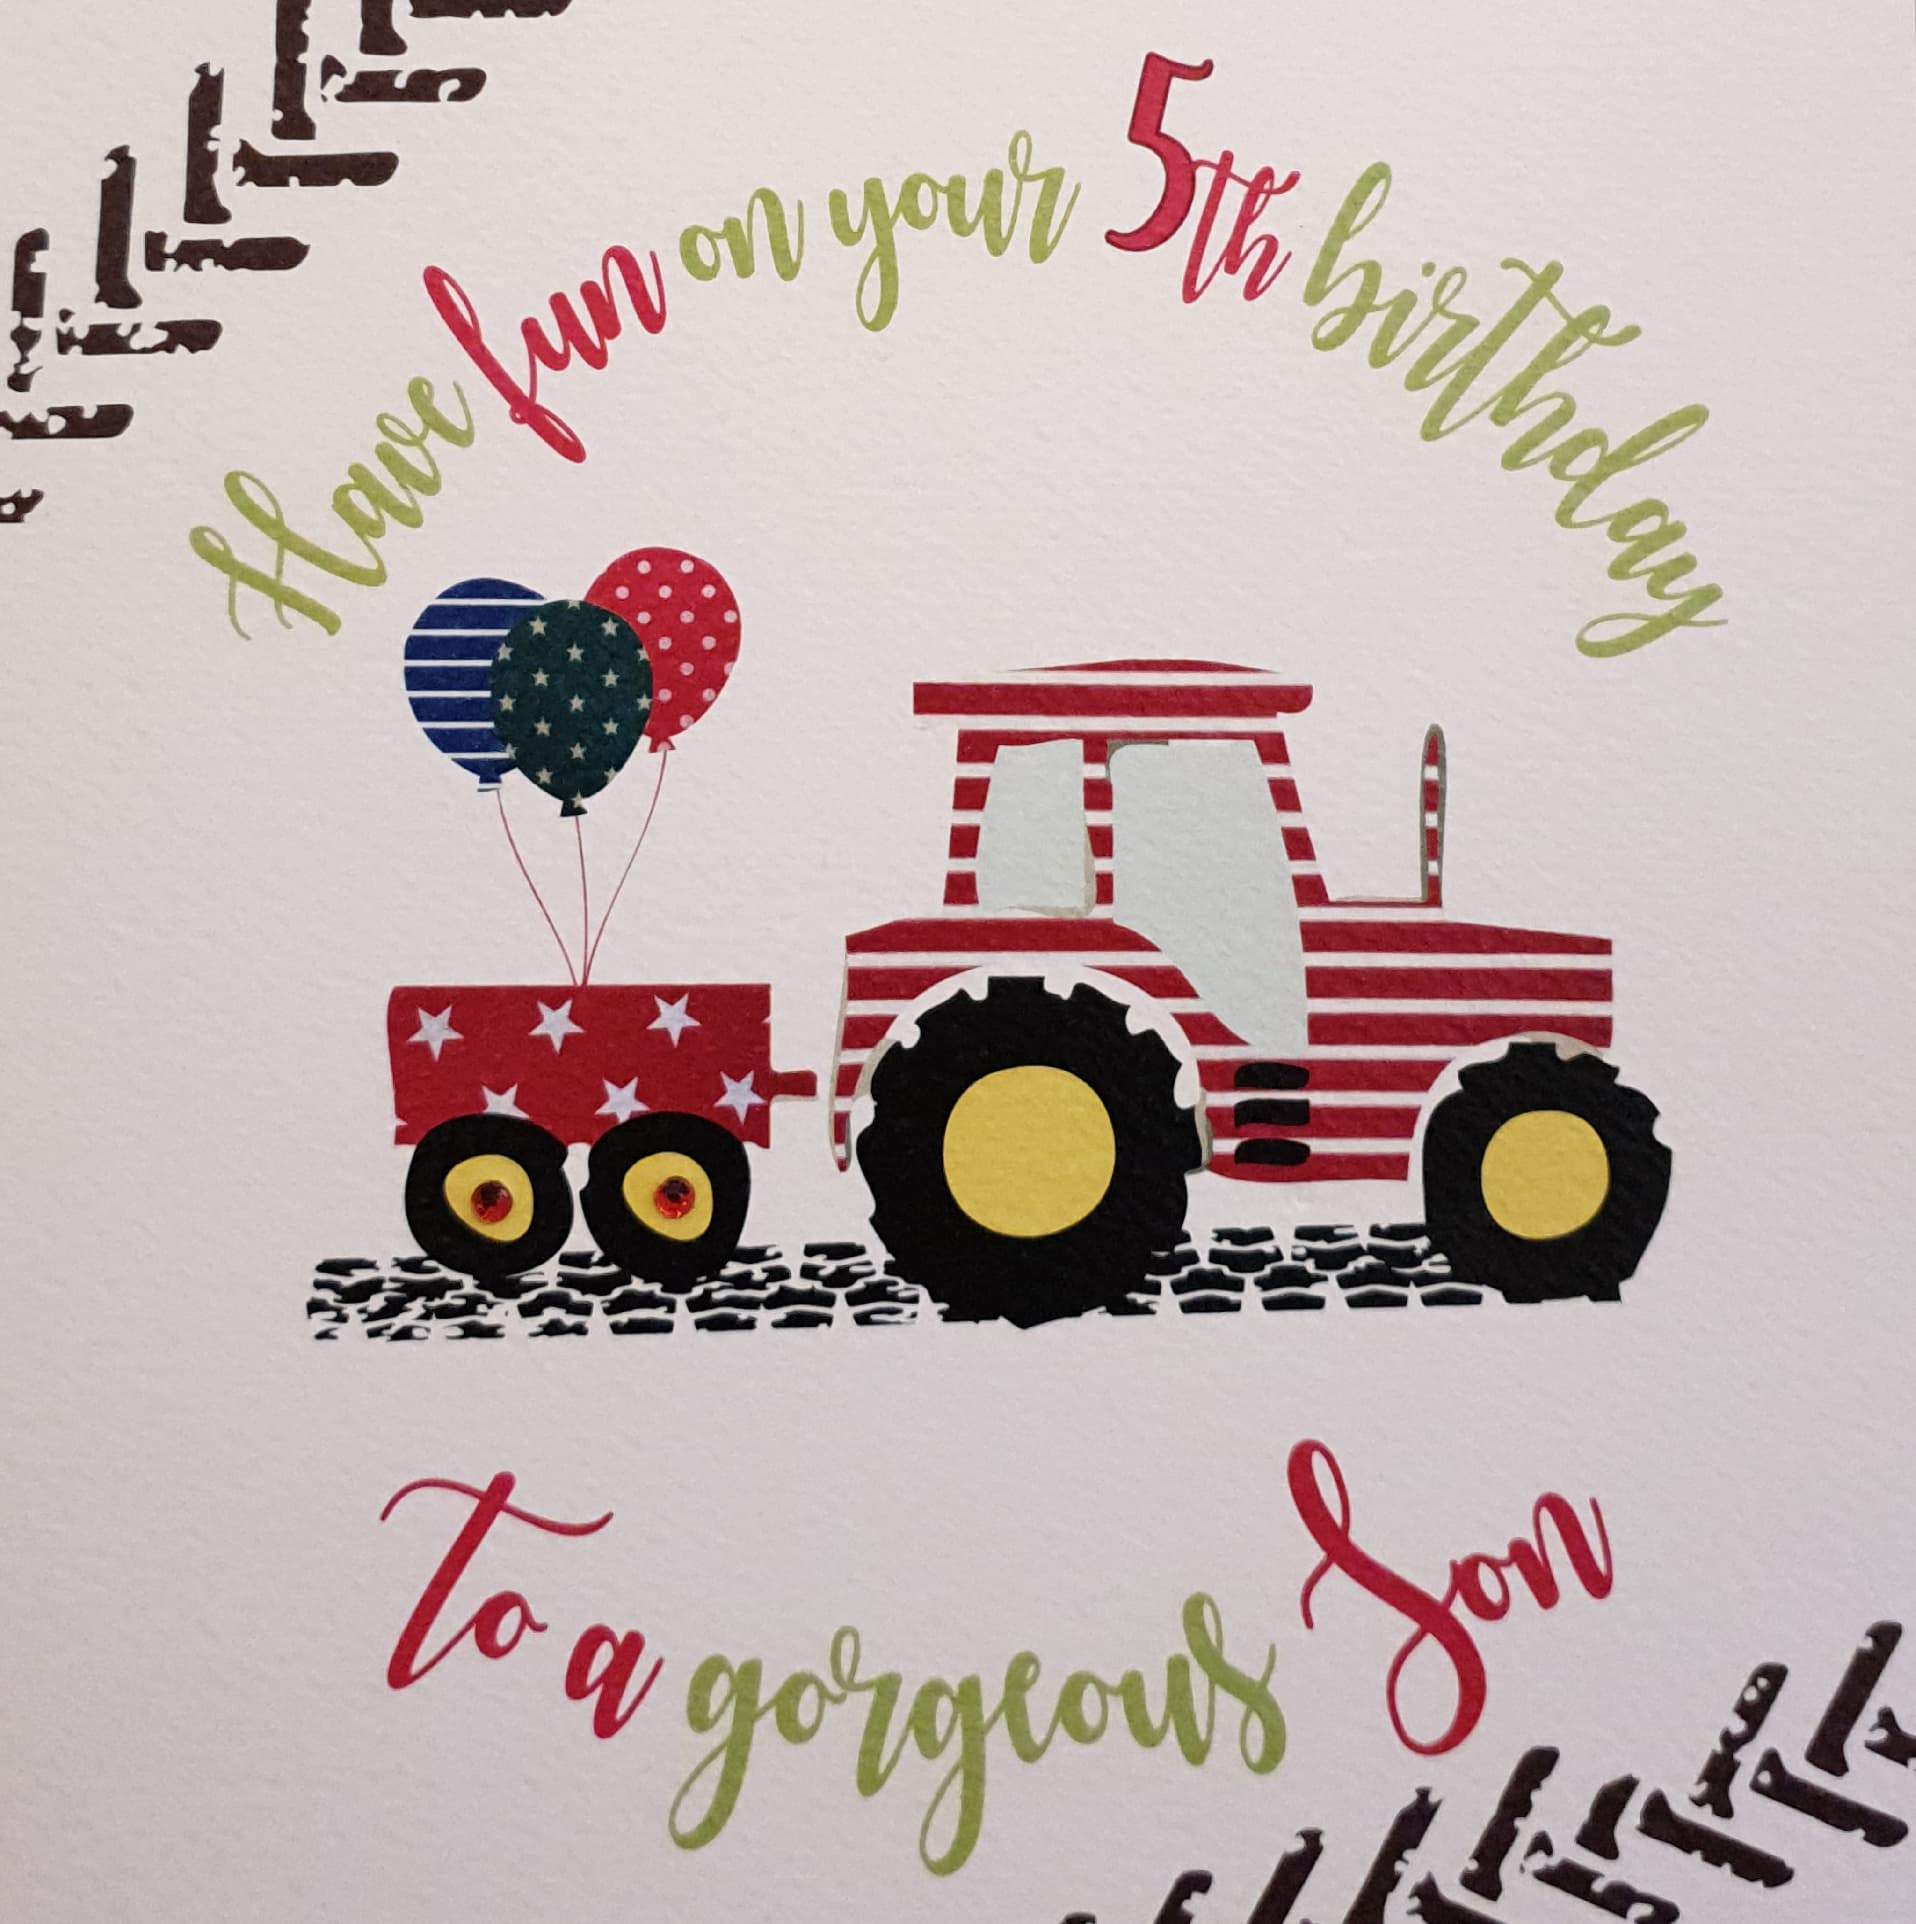 Birthday Card - Son - 5th Birthday / Balloons Tied to Red & White Tractor Trailer